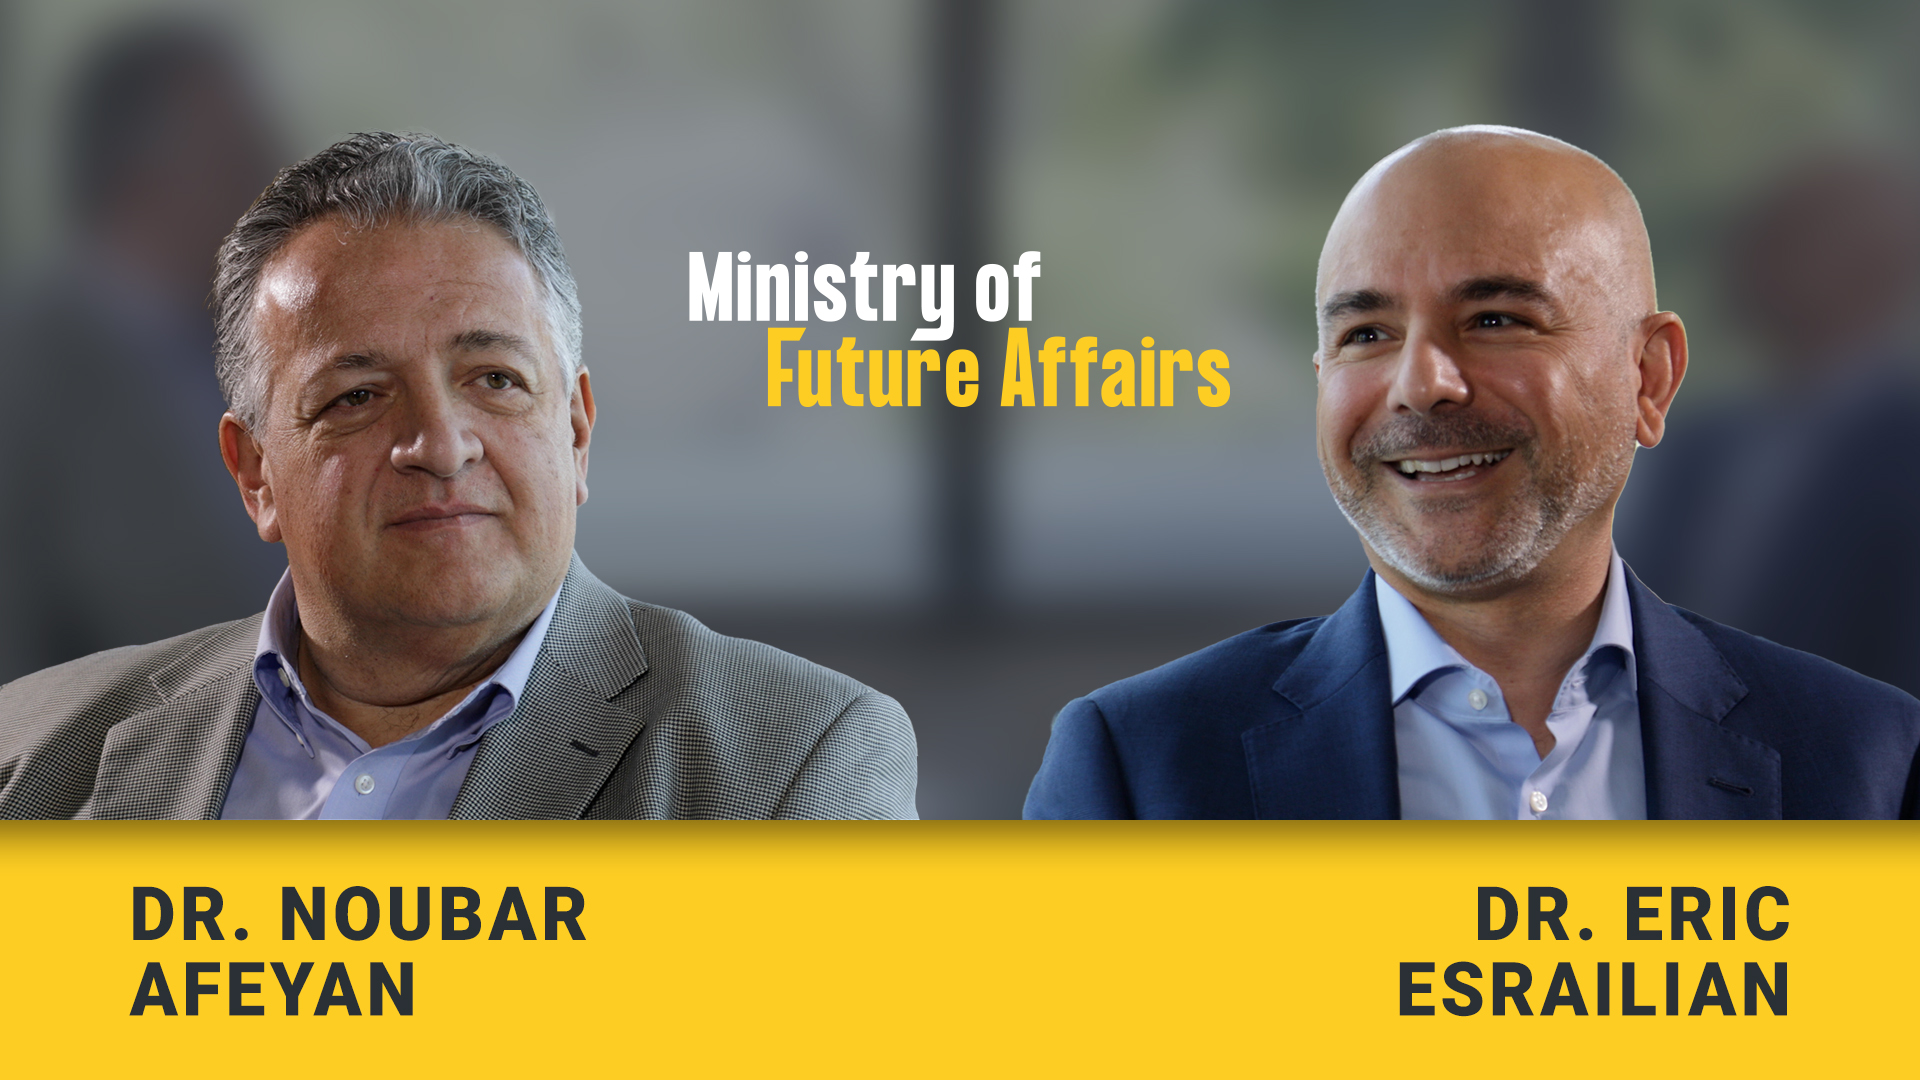 Ministry of Future Affairs: Inaugural interview between Noubar Afeyan and Eric Esrailian